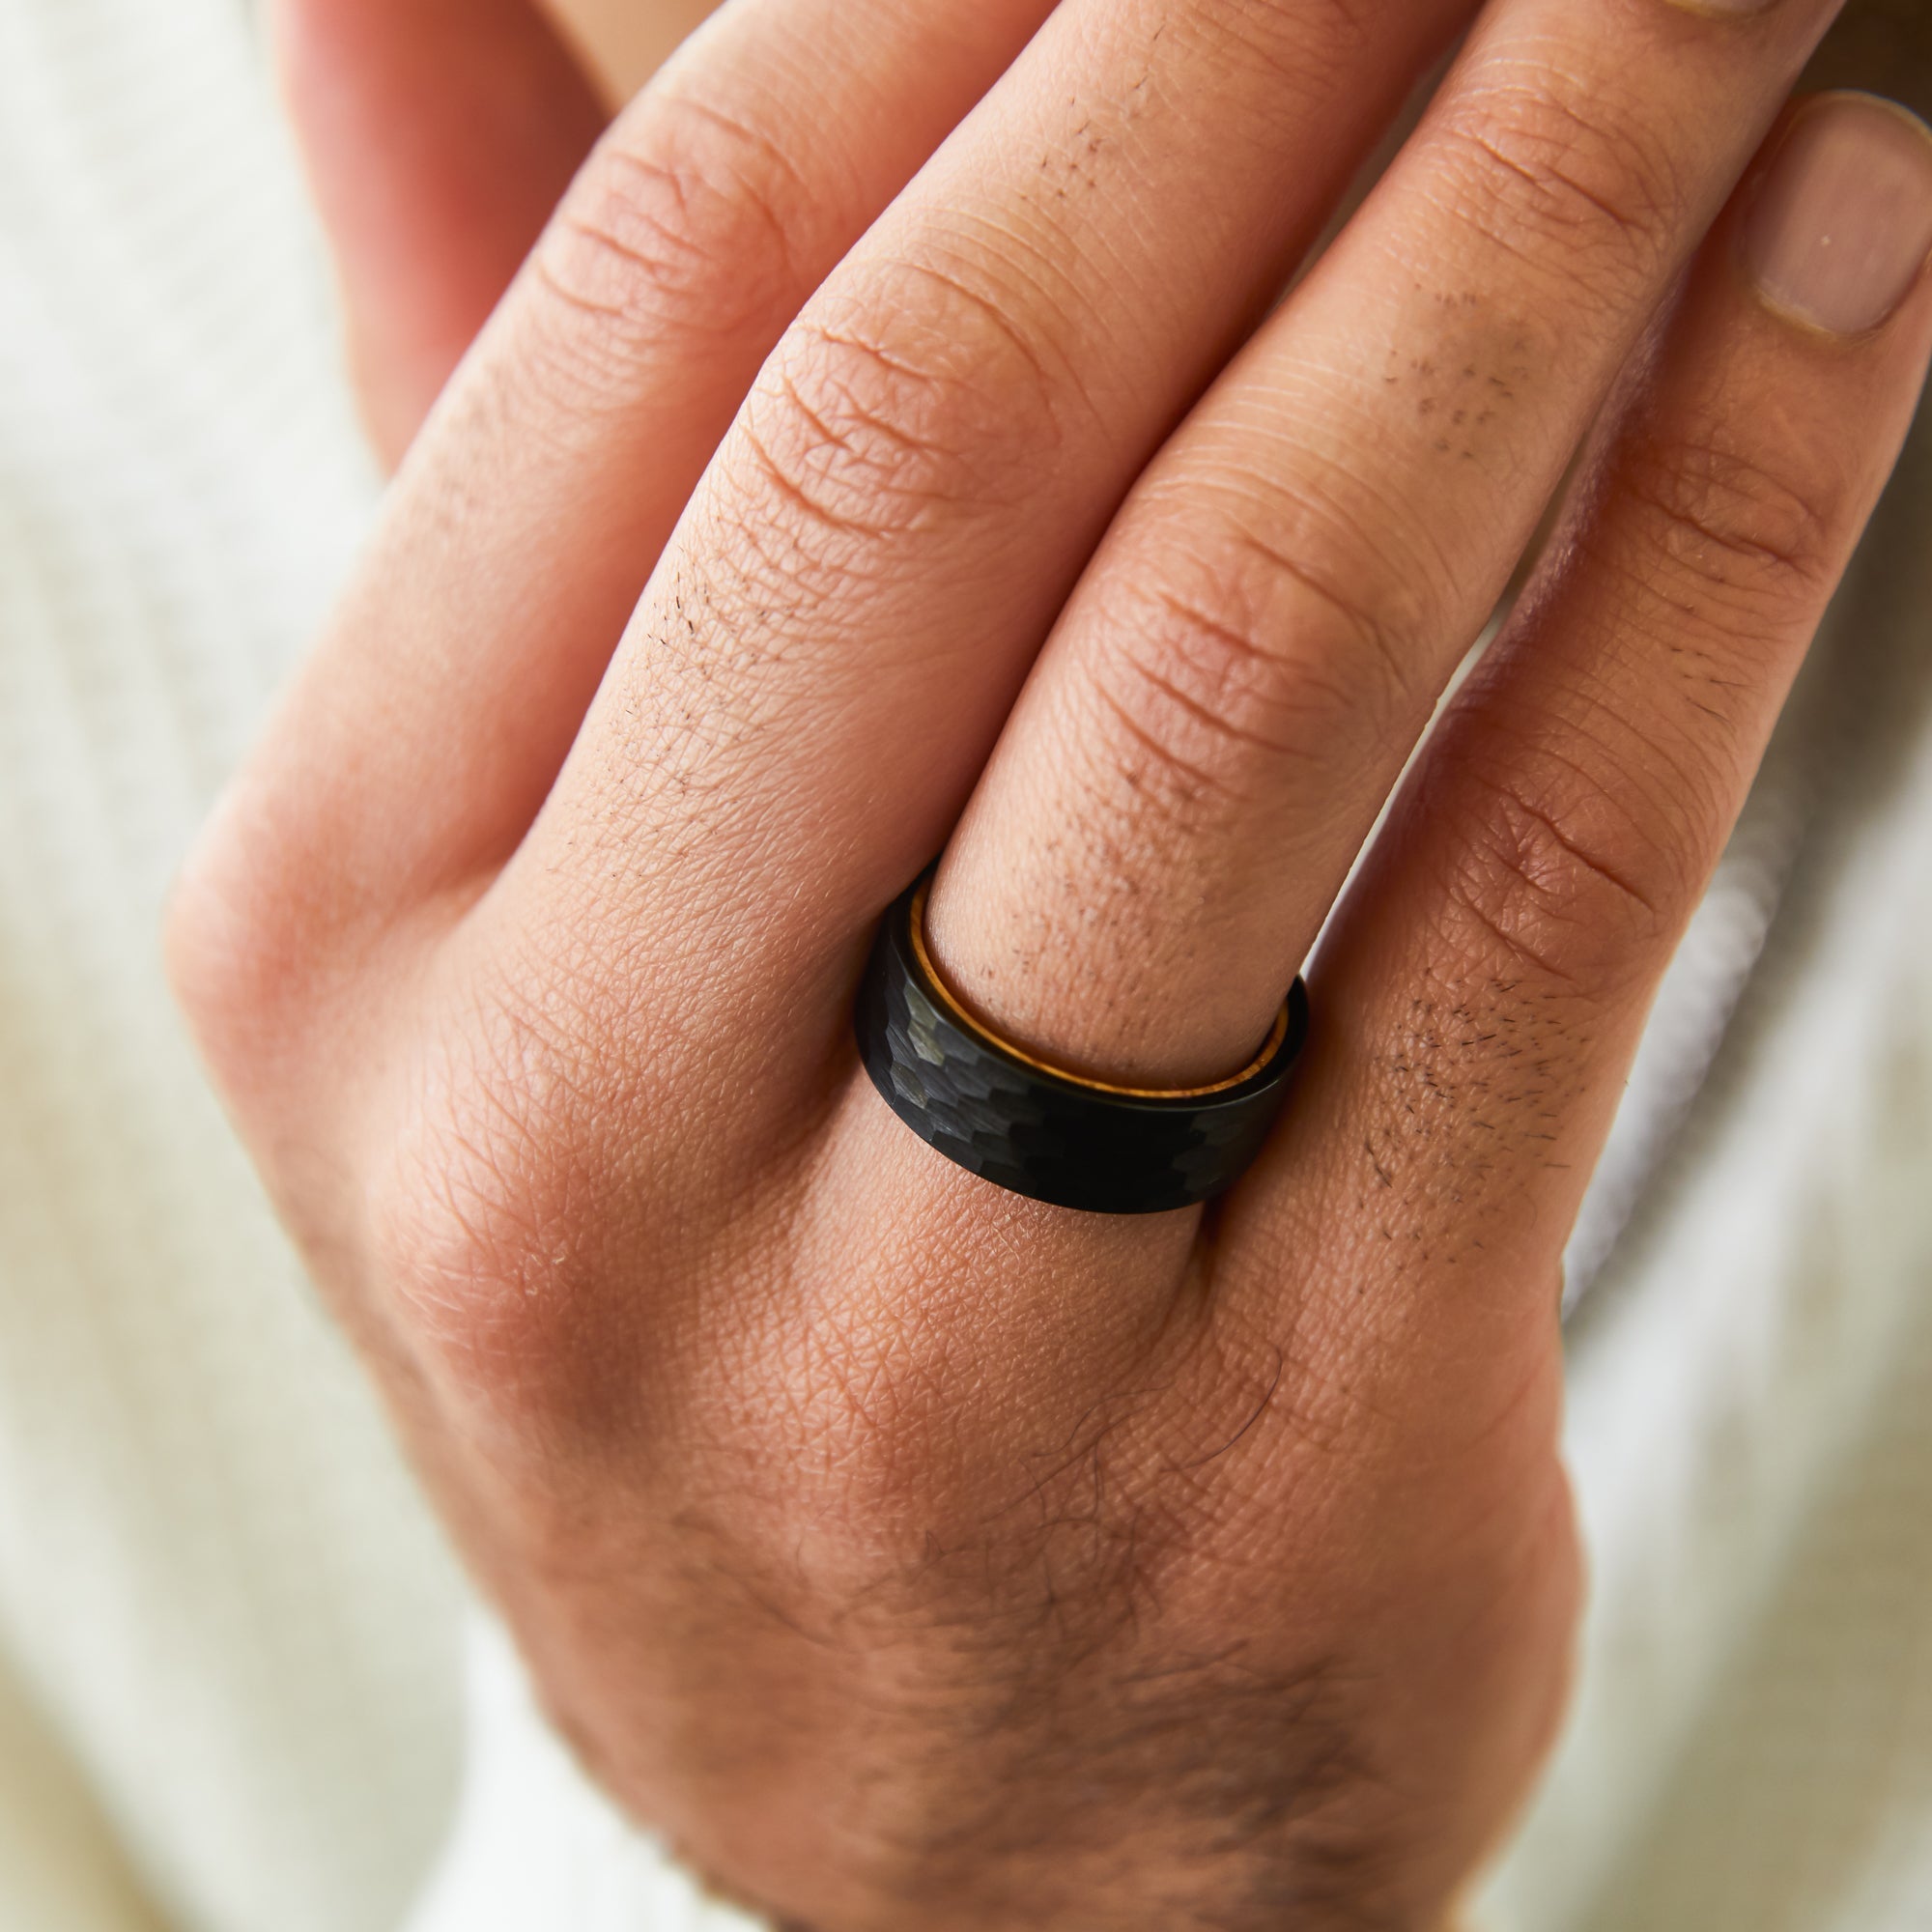 Hammered Black and Wood Men's Wedding Ring